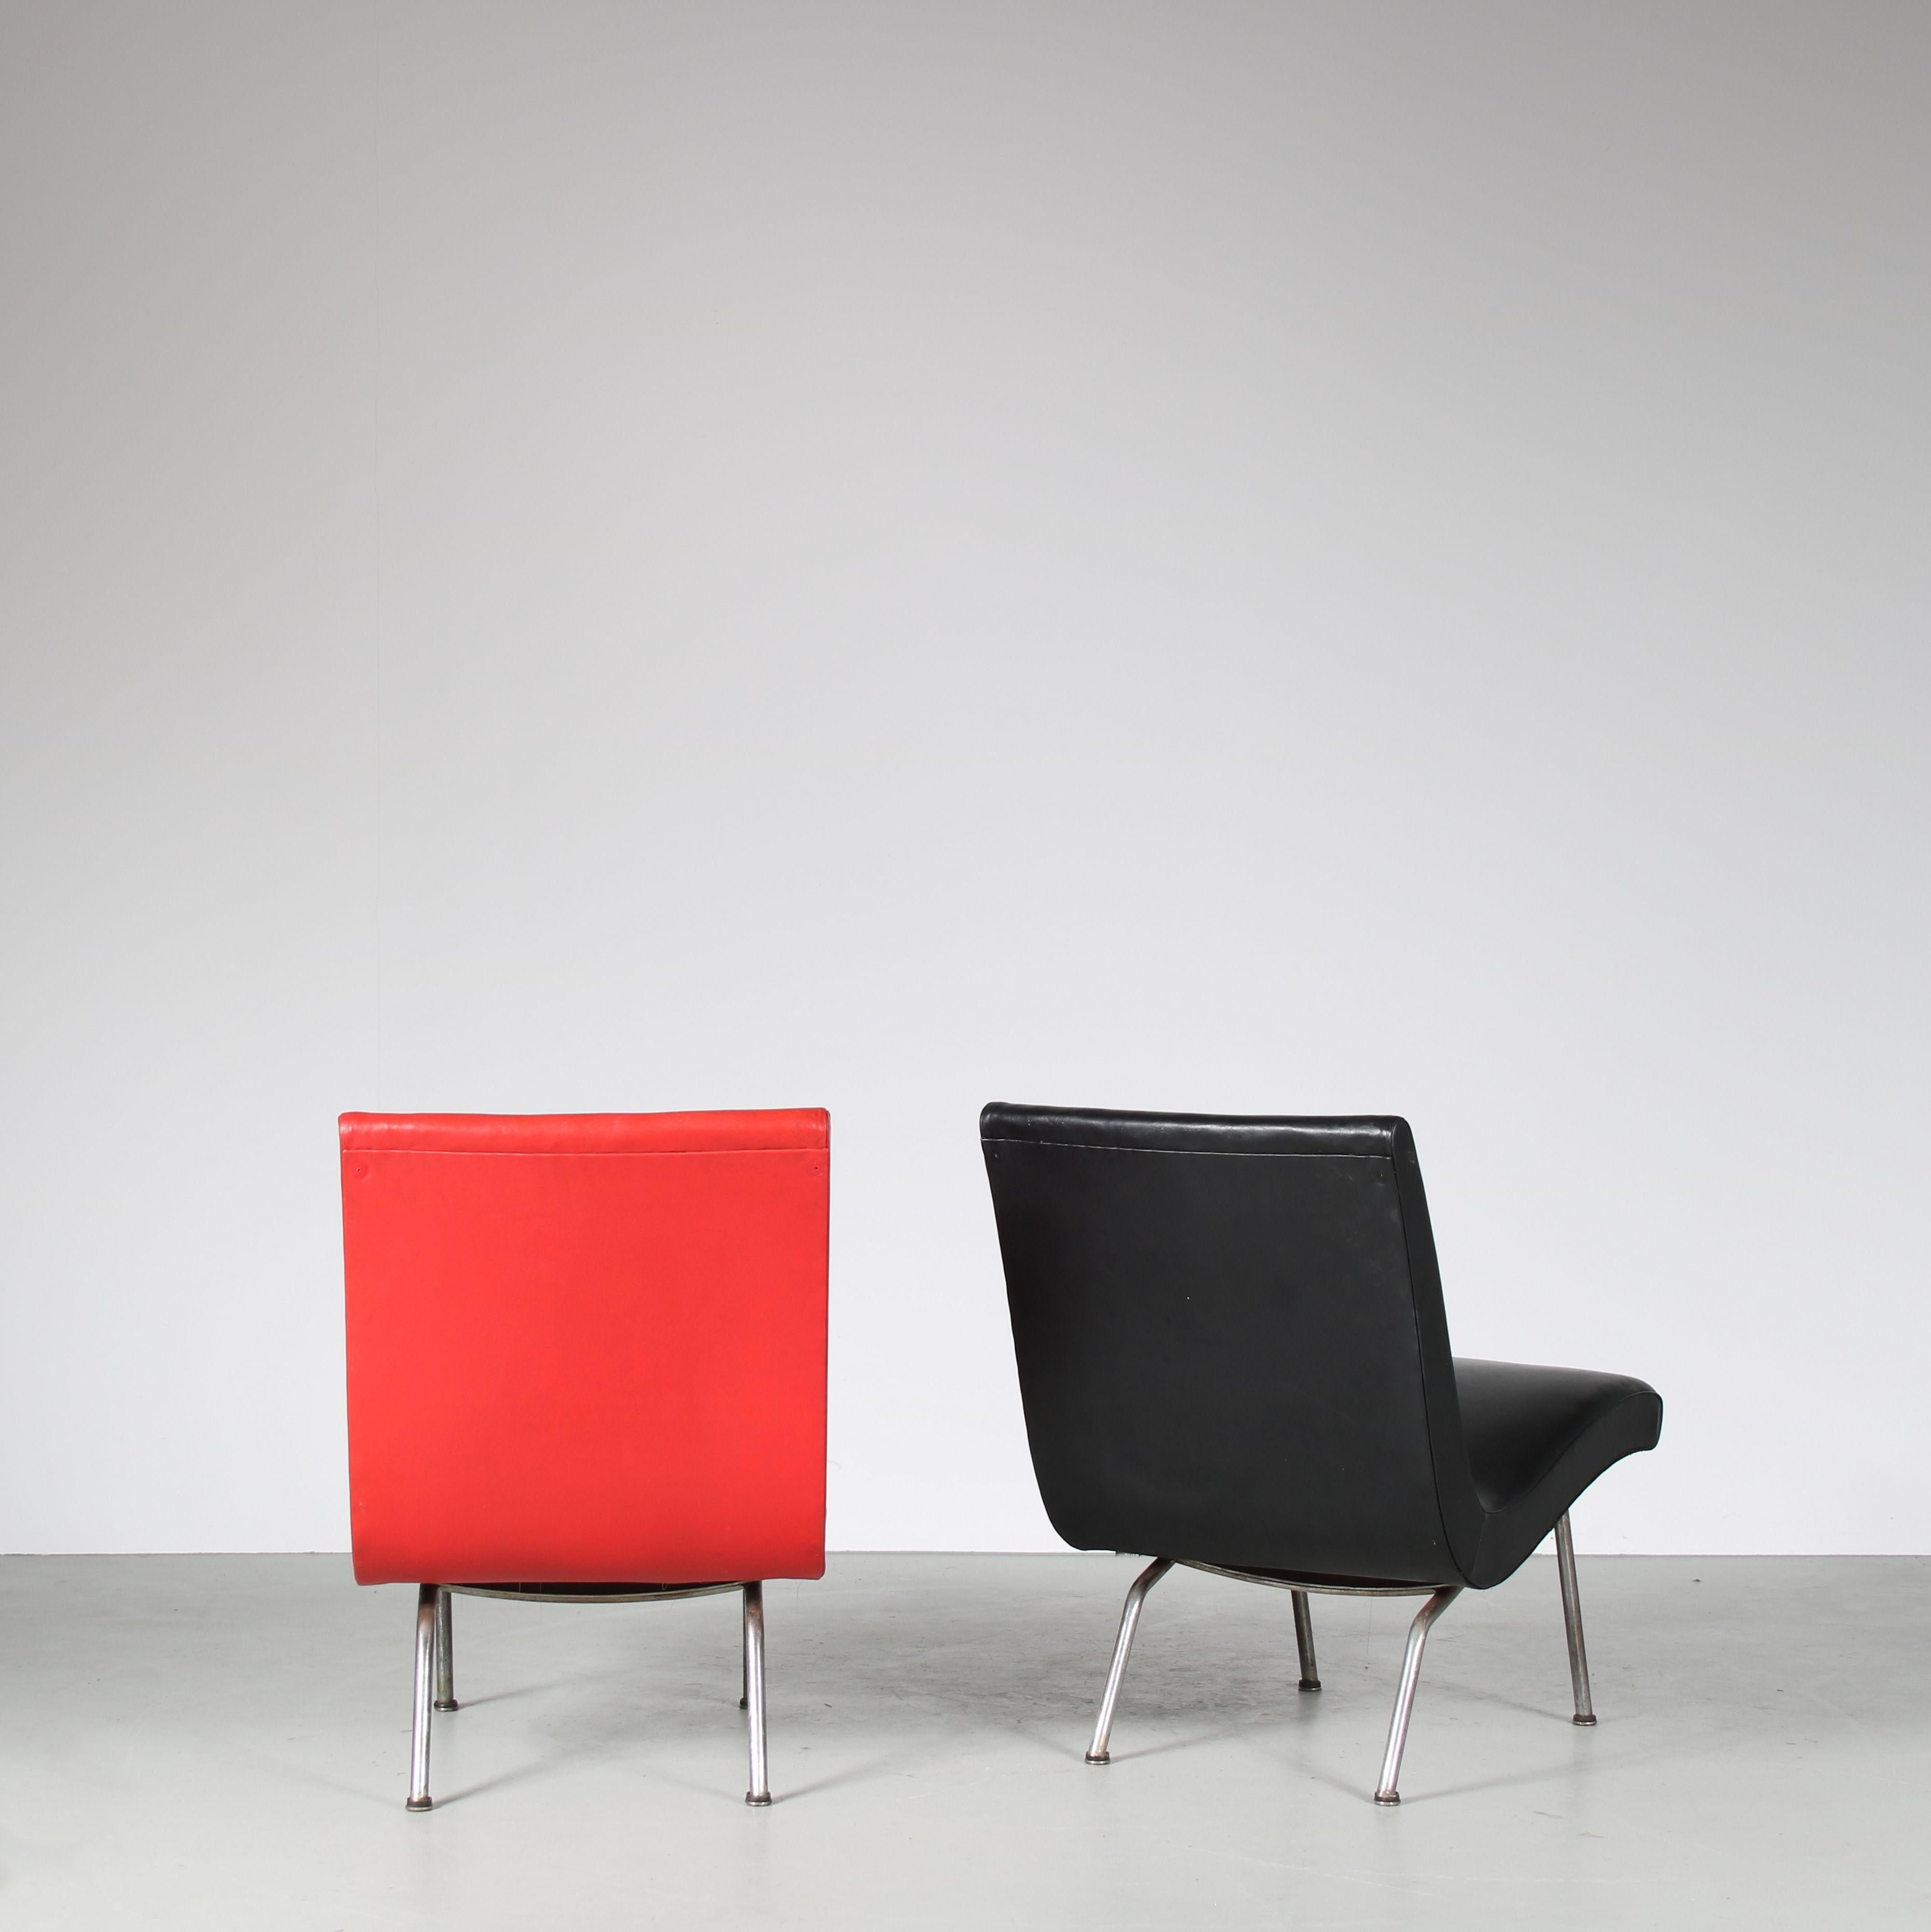 Mid-20th Century Pair of Walter Knoll “Vostra” Chairs for Knoll, Germany, 1947 For Sale